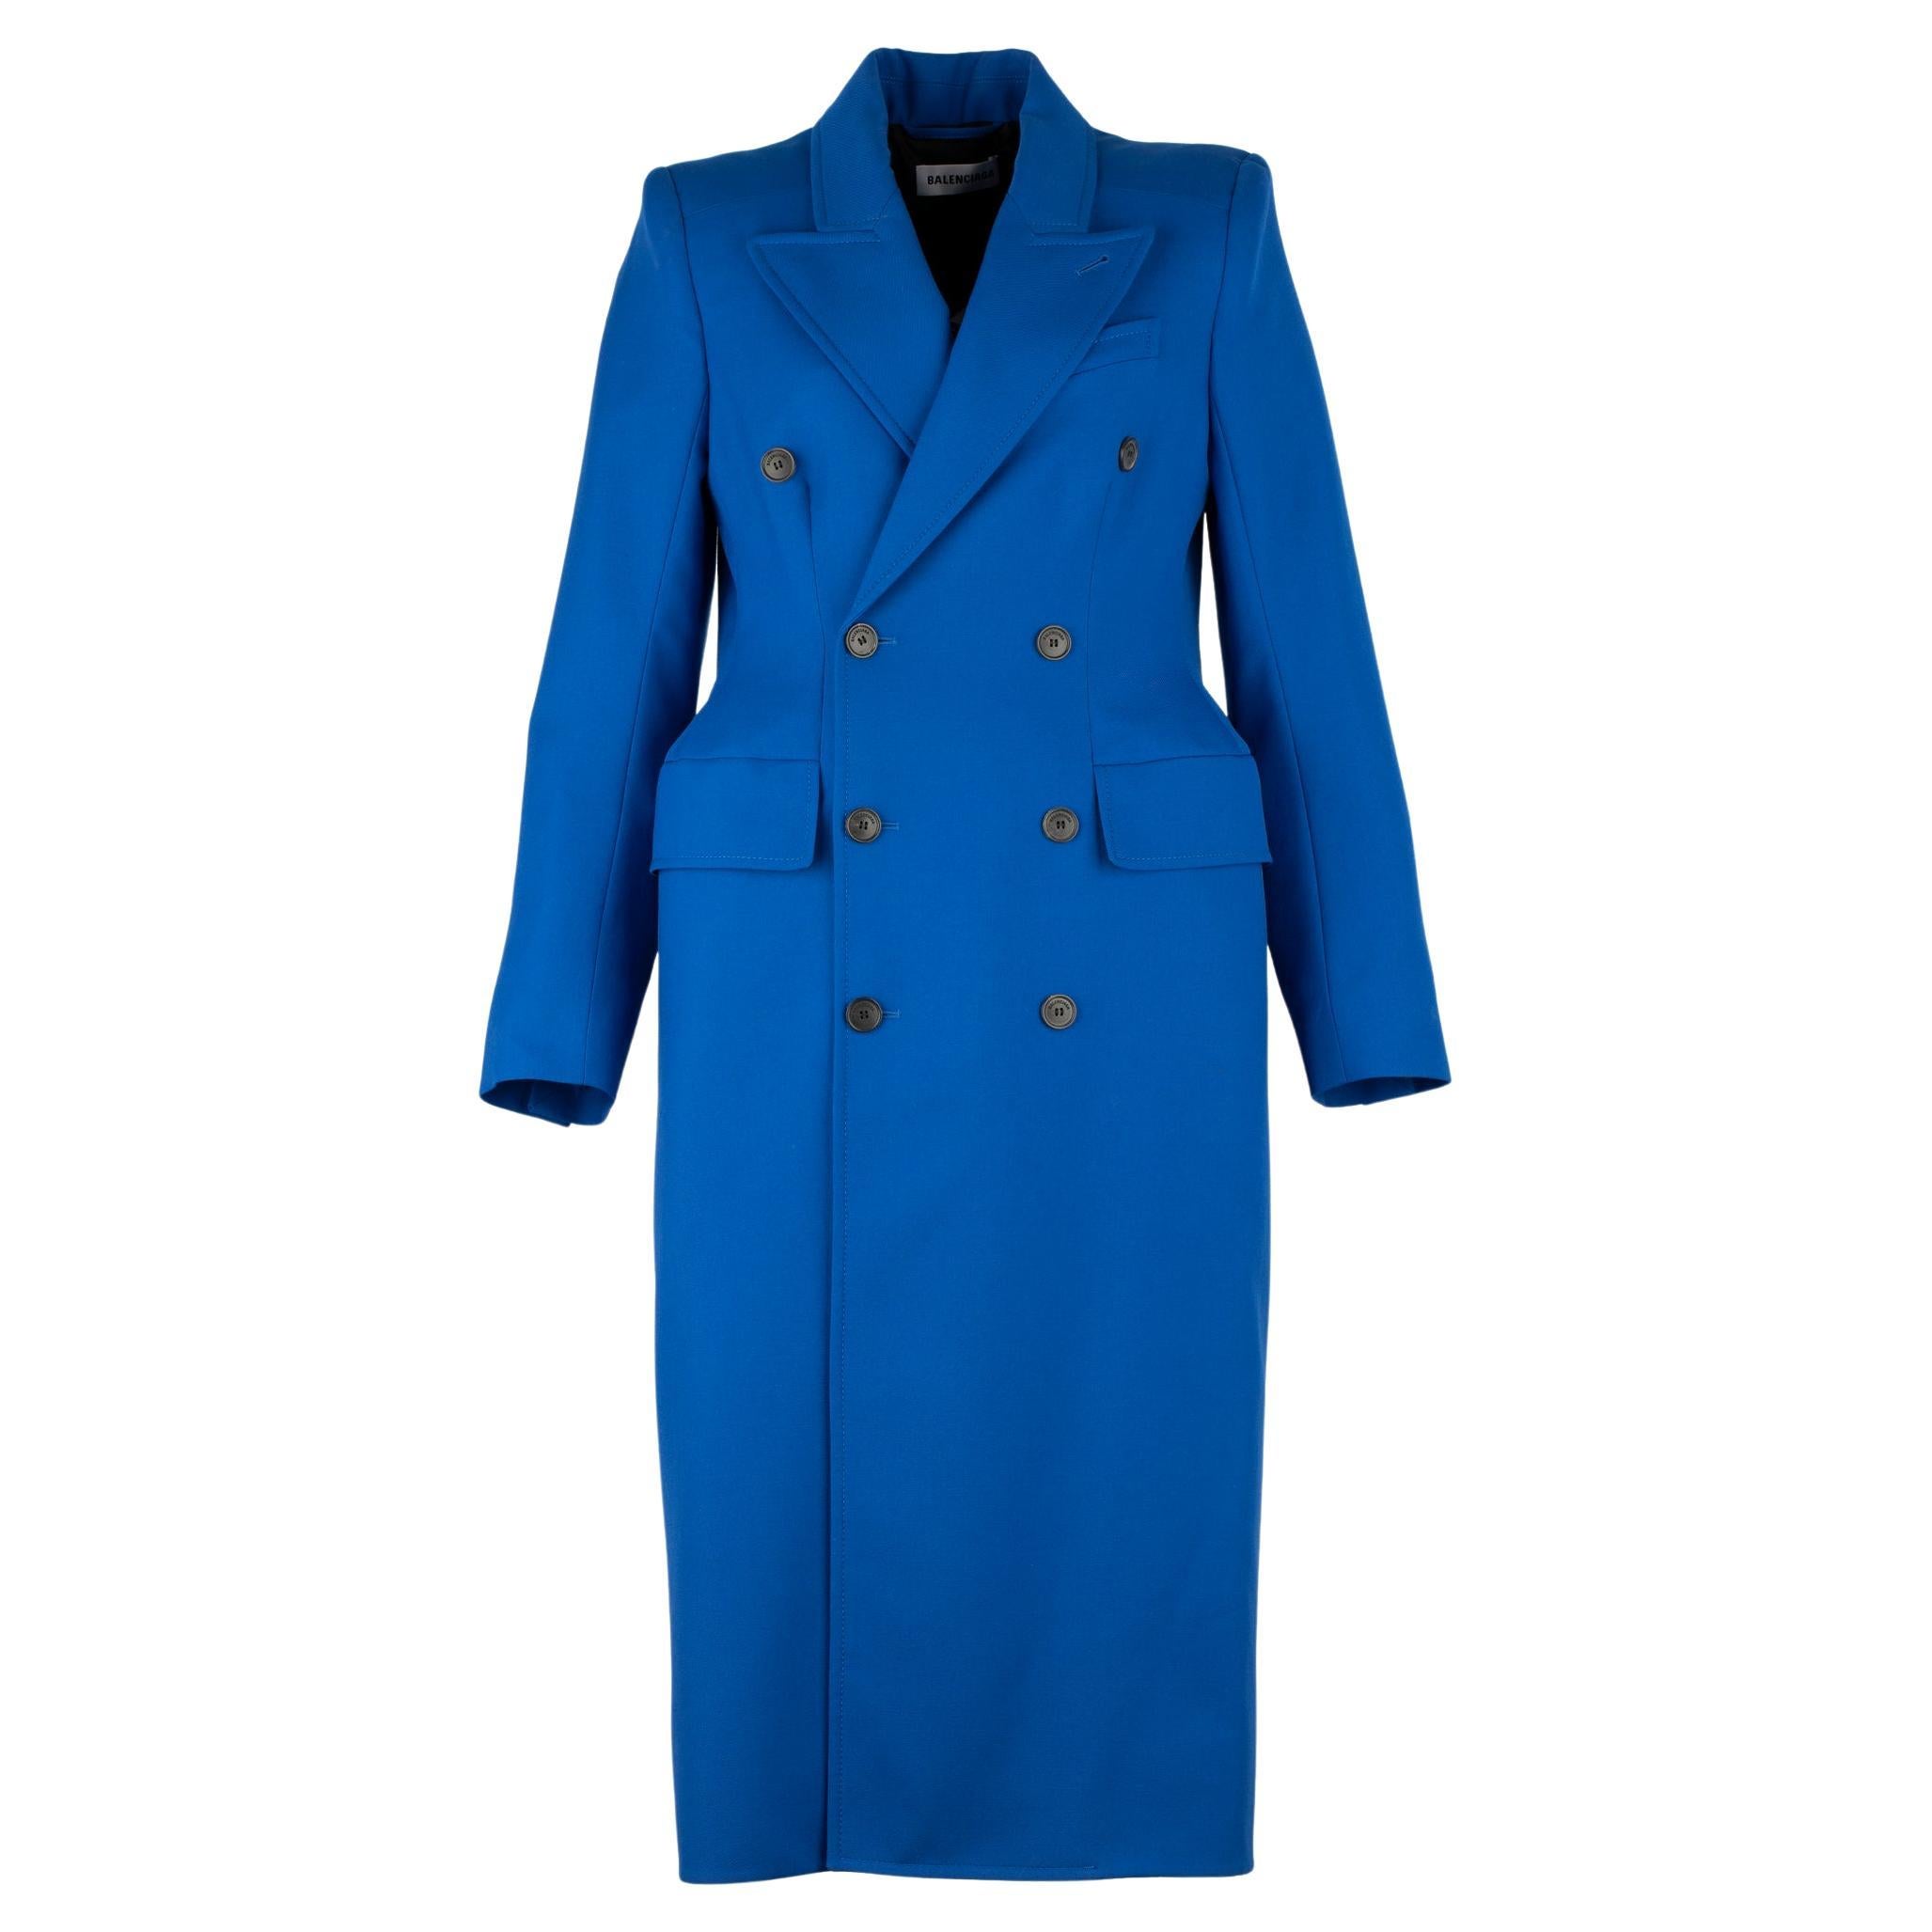 Balenciaga Hourglass Double Breasted Wool Blend Coat Royal Blue 38 FR